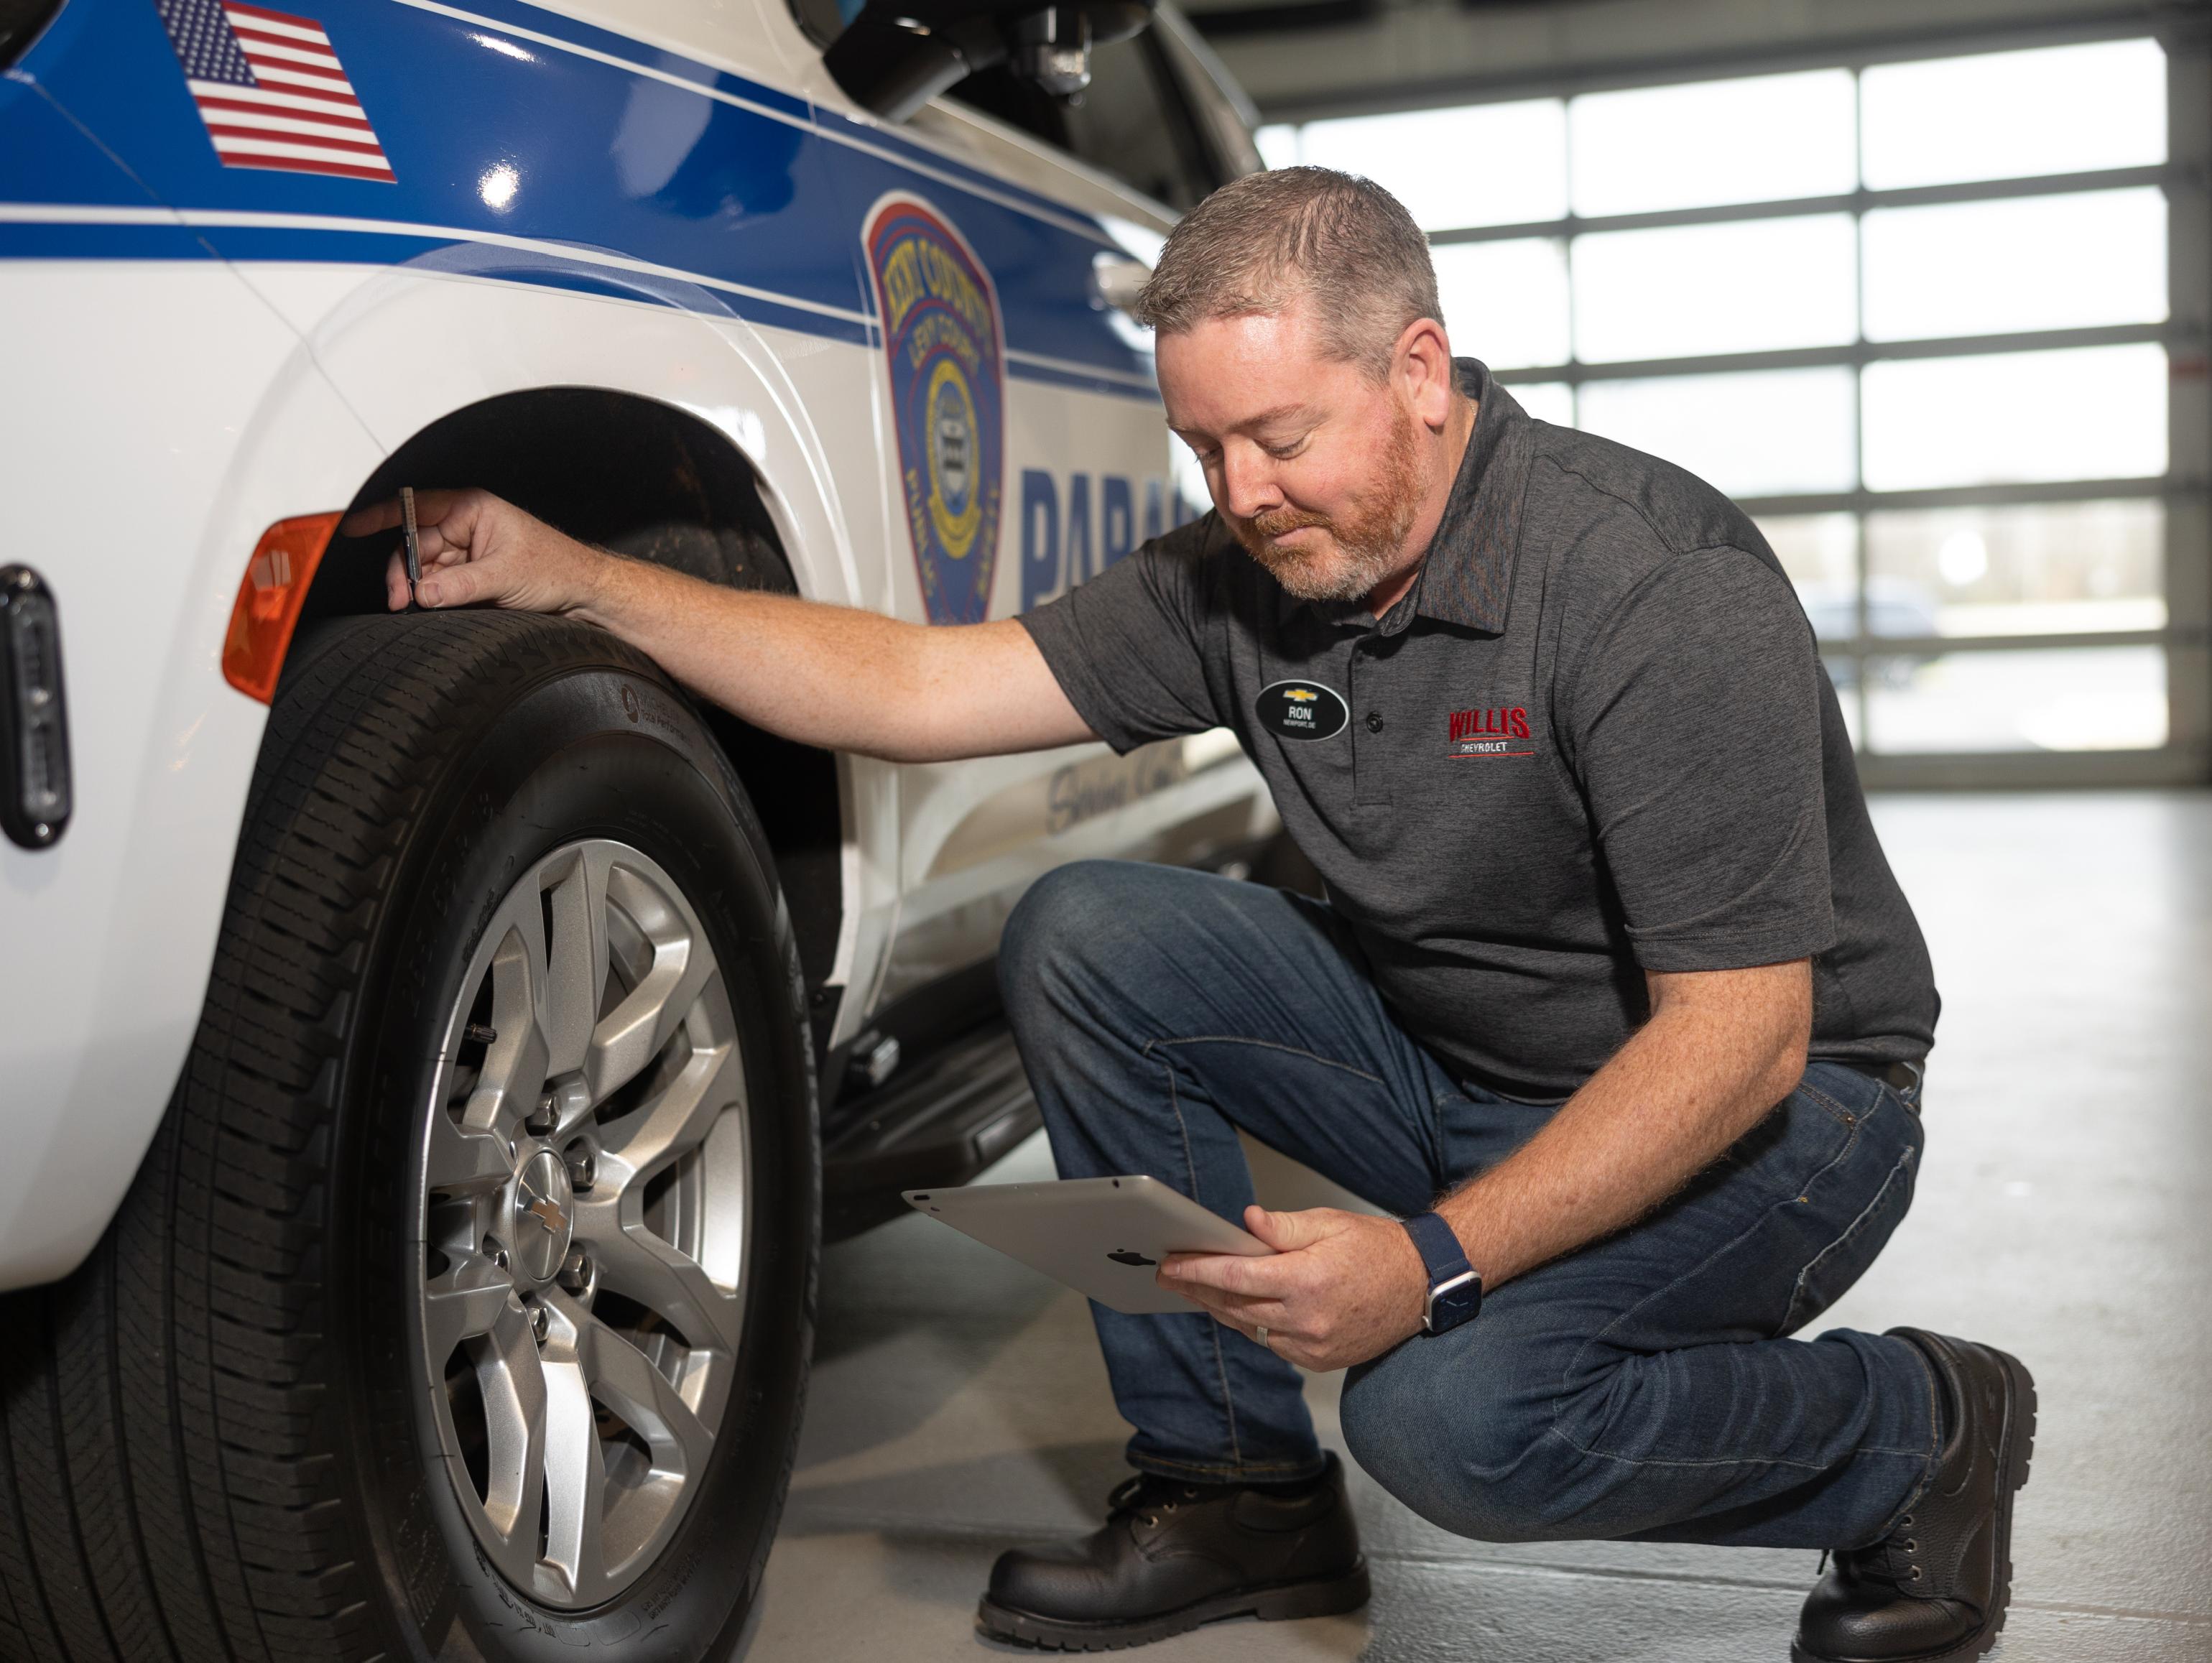 Chevrolet Service technician checking on tires of SUV